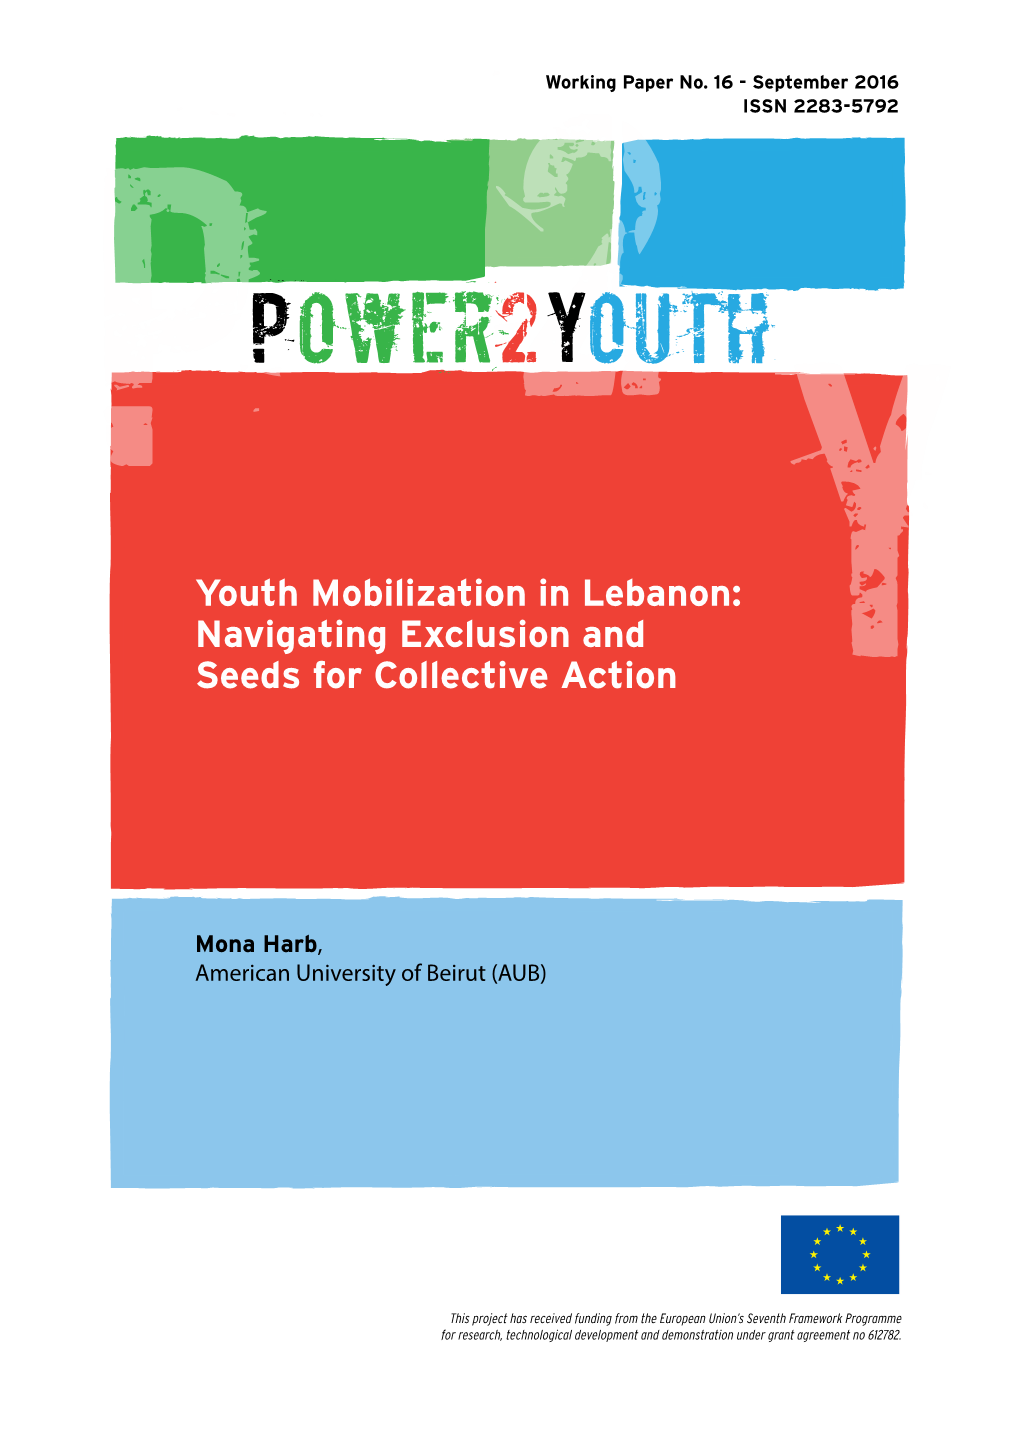 Youth Mobilization in Lebanon: Navigating Exclusion and Seeds for Collective Action